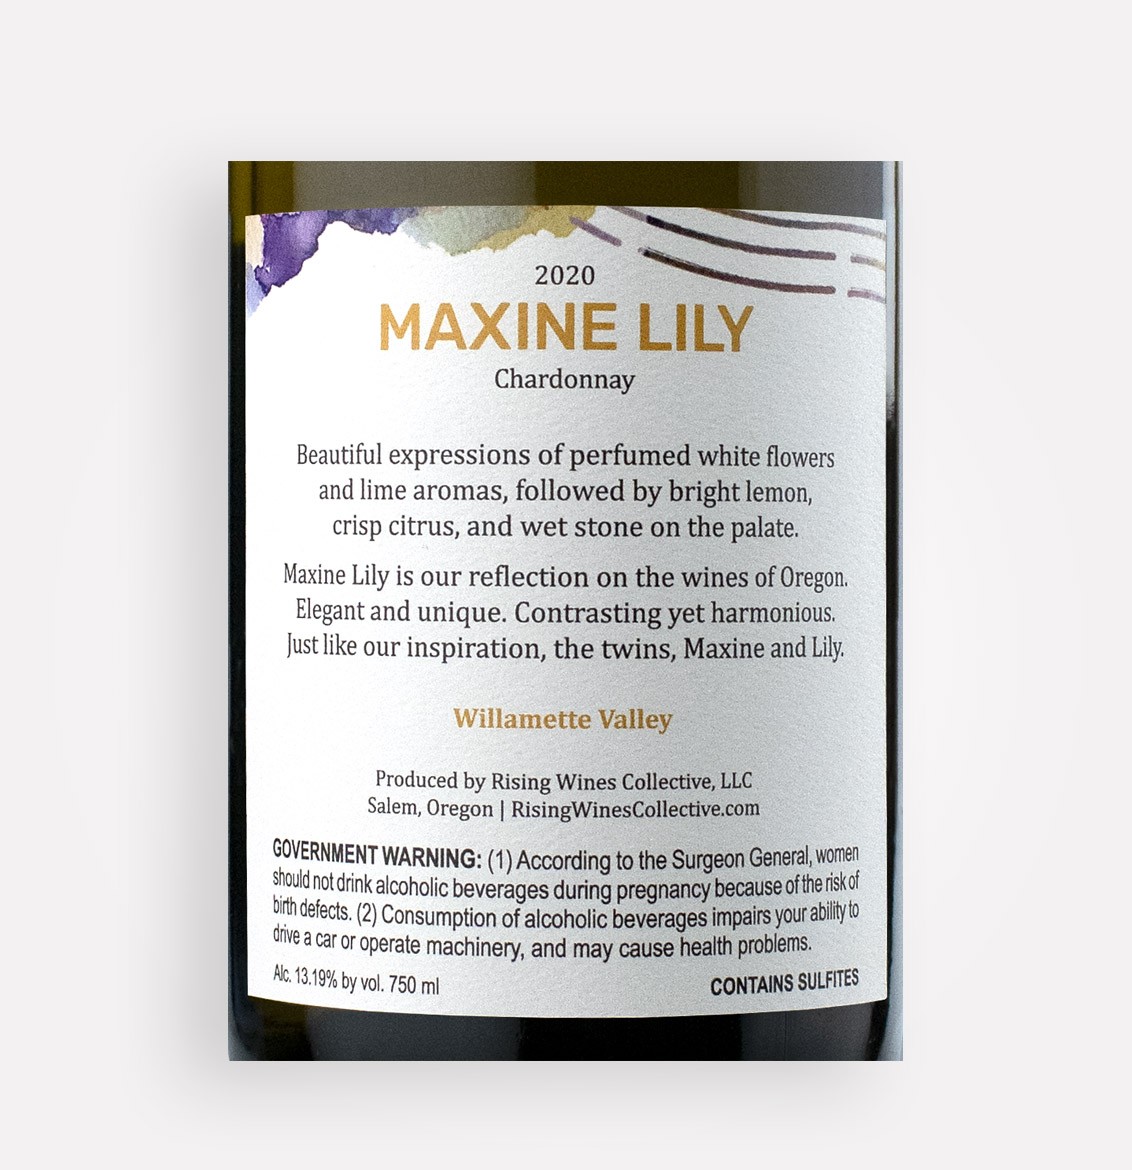 Back label close-up of Maxine Lily 2020 Chardonnay wine from Oregon's Willamette Valley